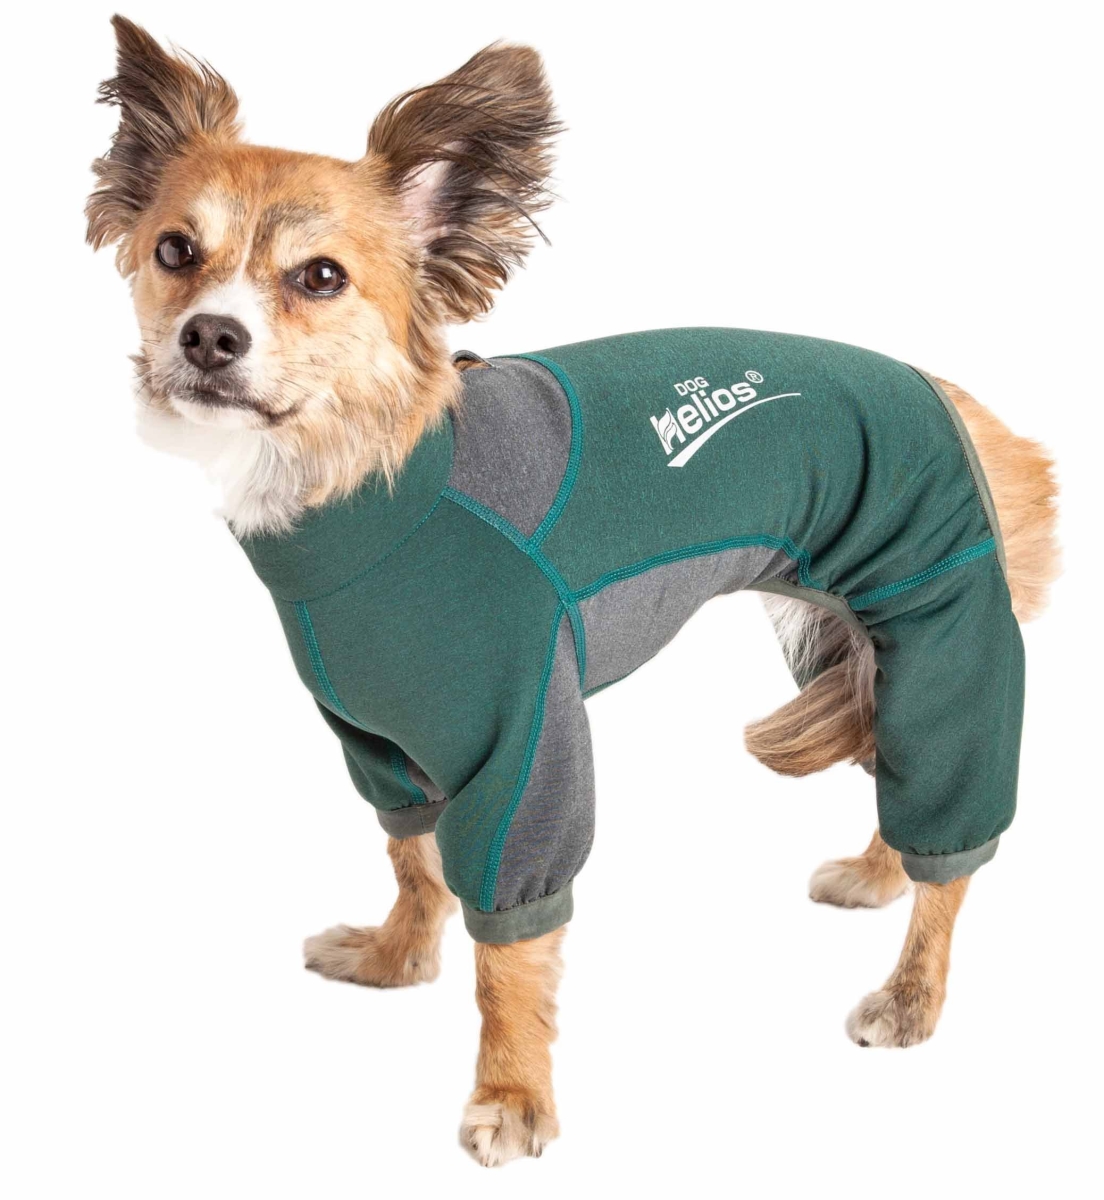 Yghl8gnxl Rufflex 4-way-stretch Breathable Full Bodied Performance Dog Warmup Track Suit - Green & Grey, Extra Large